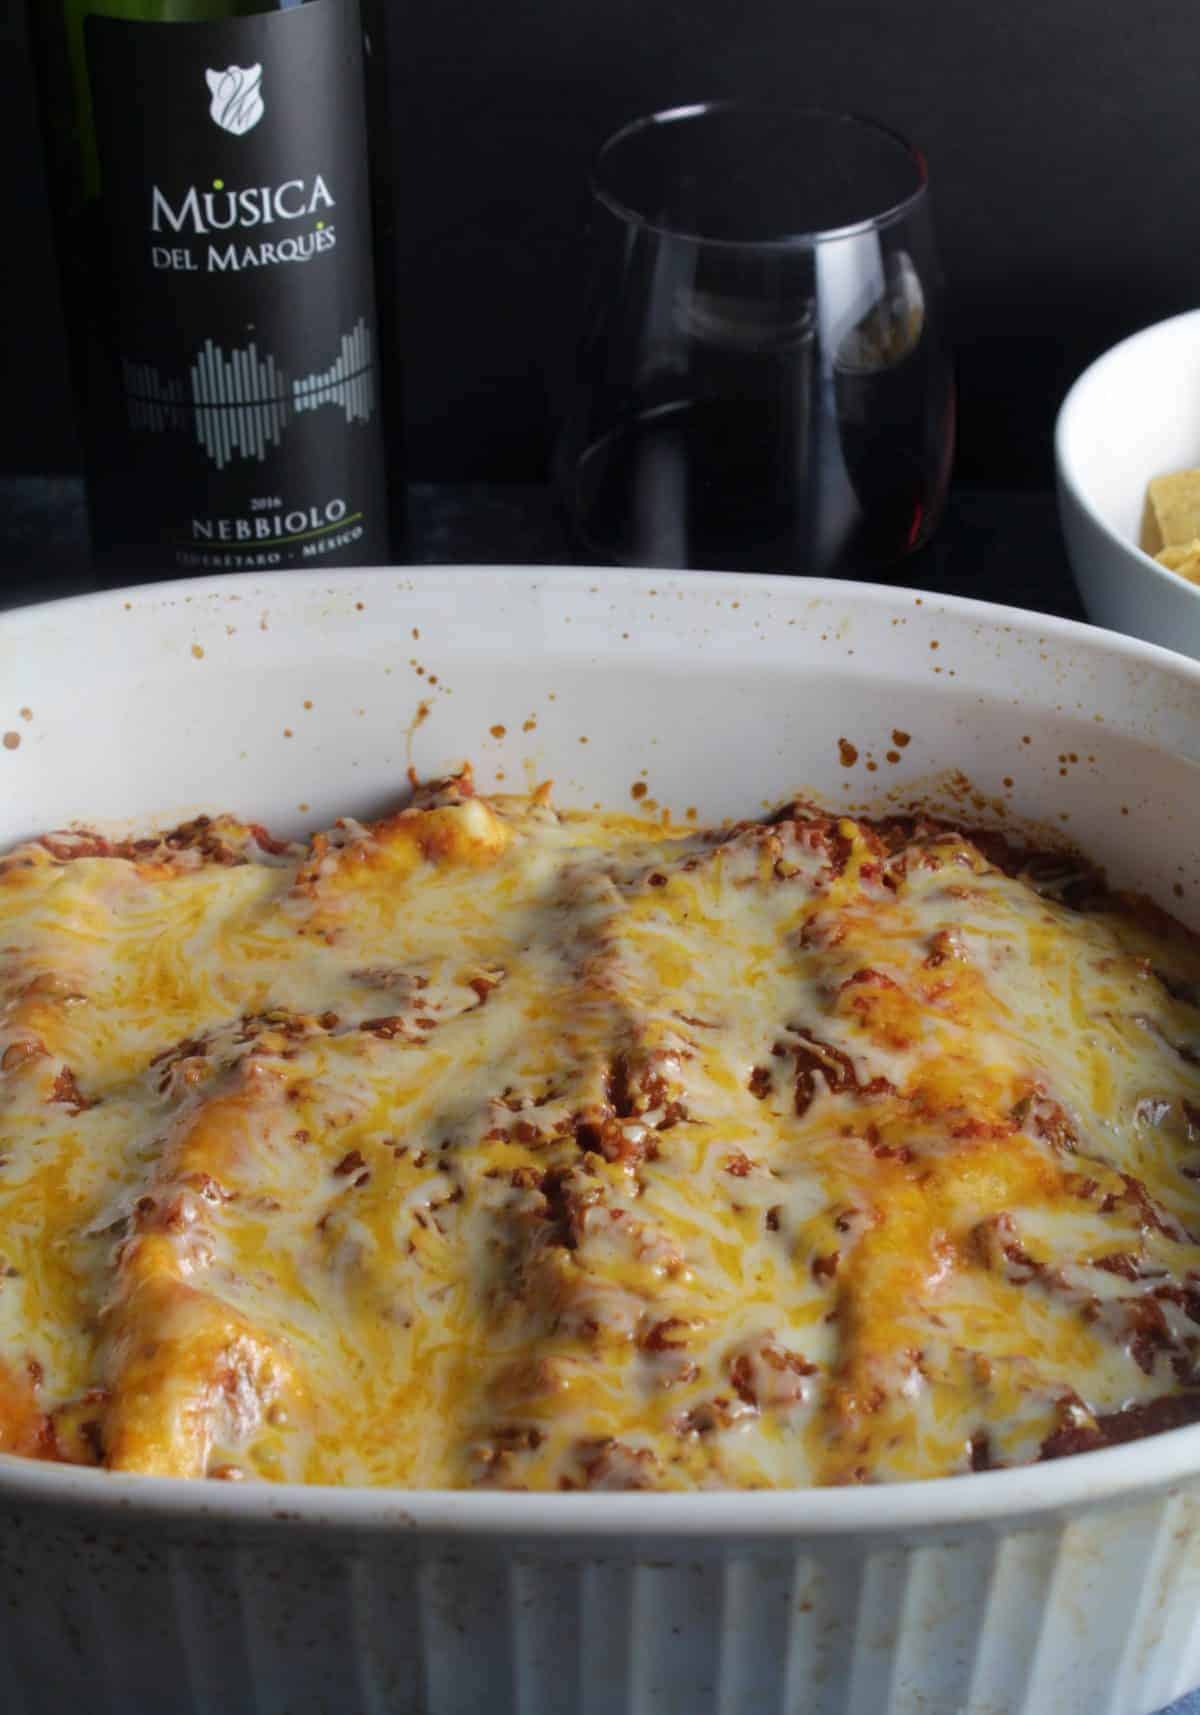 Ground turkey enchiladas in a baking dish, served with red wine from Mexico.